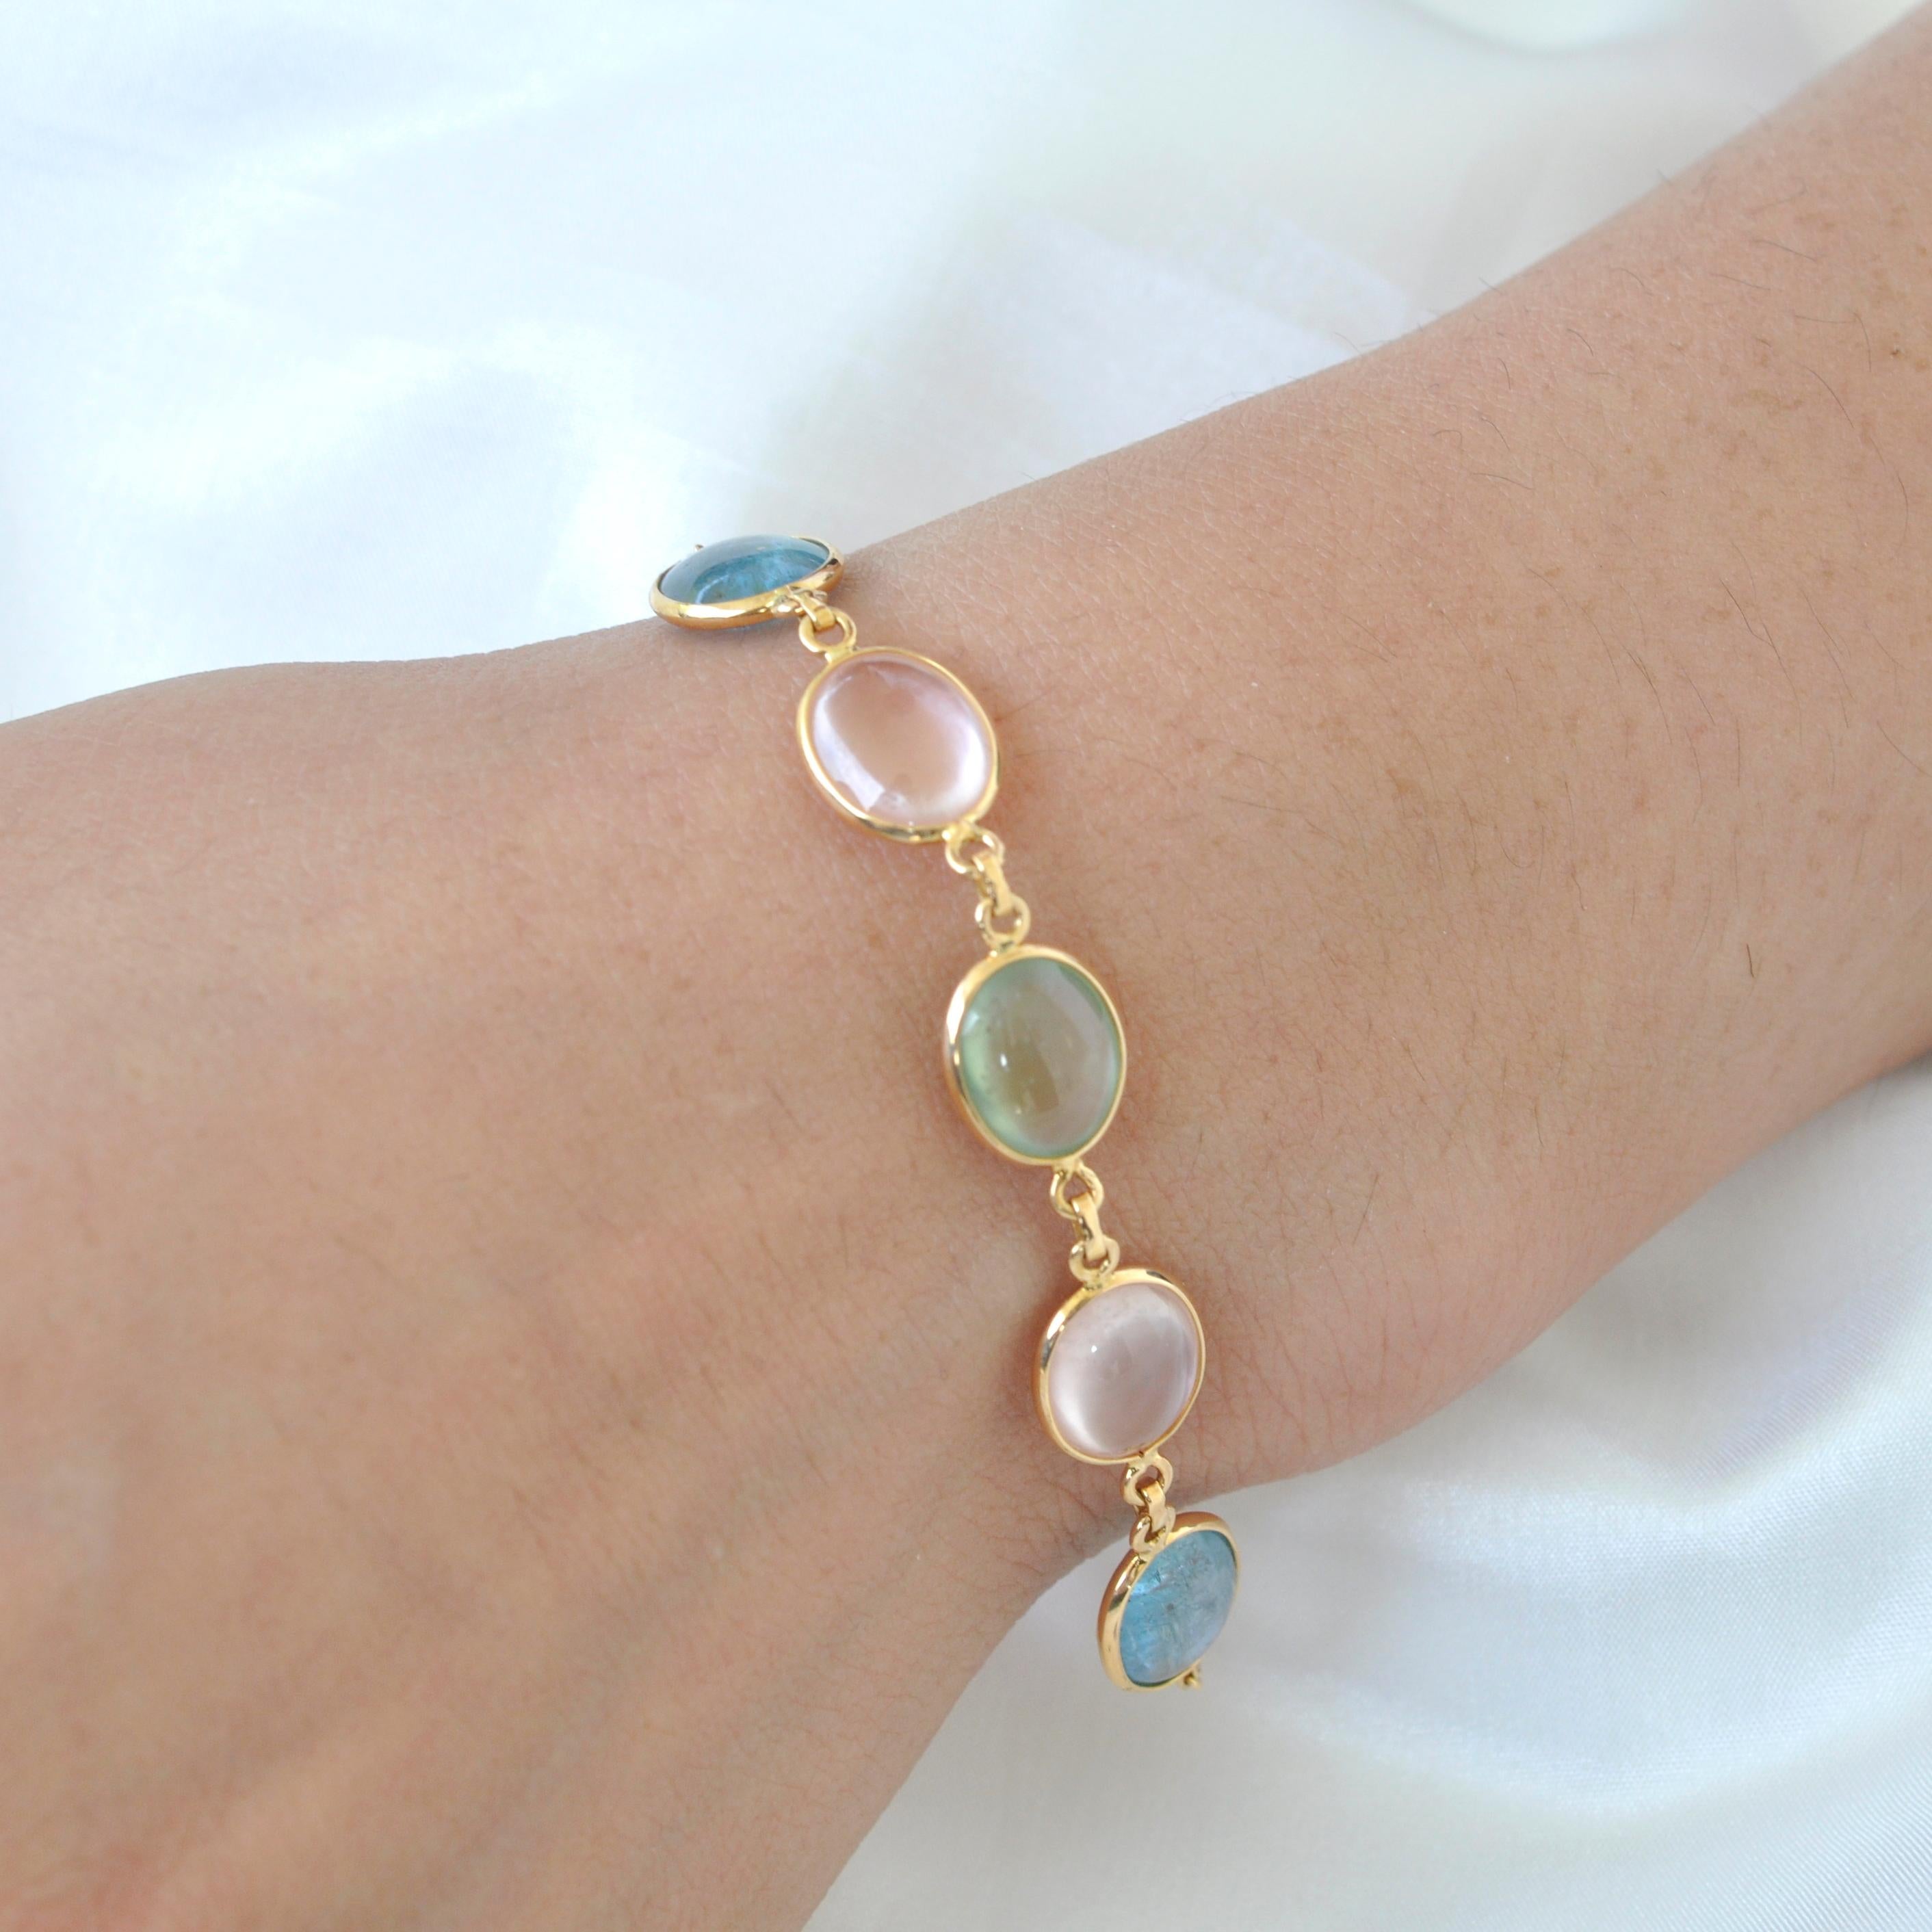 These stunning prehnite, rose quartz, aquamarine 18k yellow gold bracelet provide a look that is both trendy and classic. This bracelet are a great staple to add to your collection, and can be worn with both casual and formal wear. It would make the